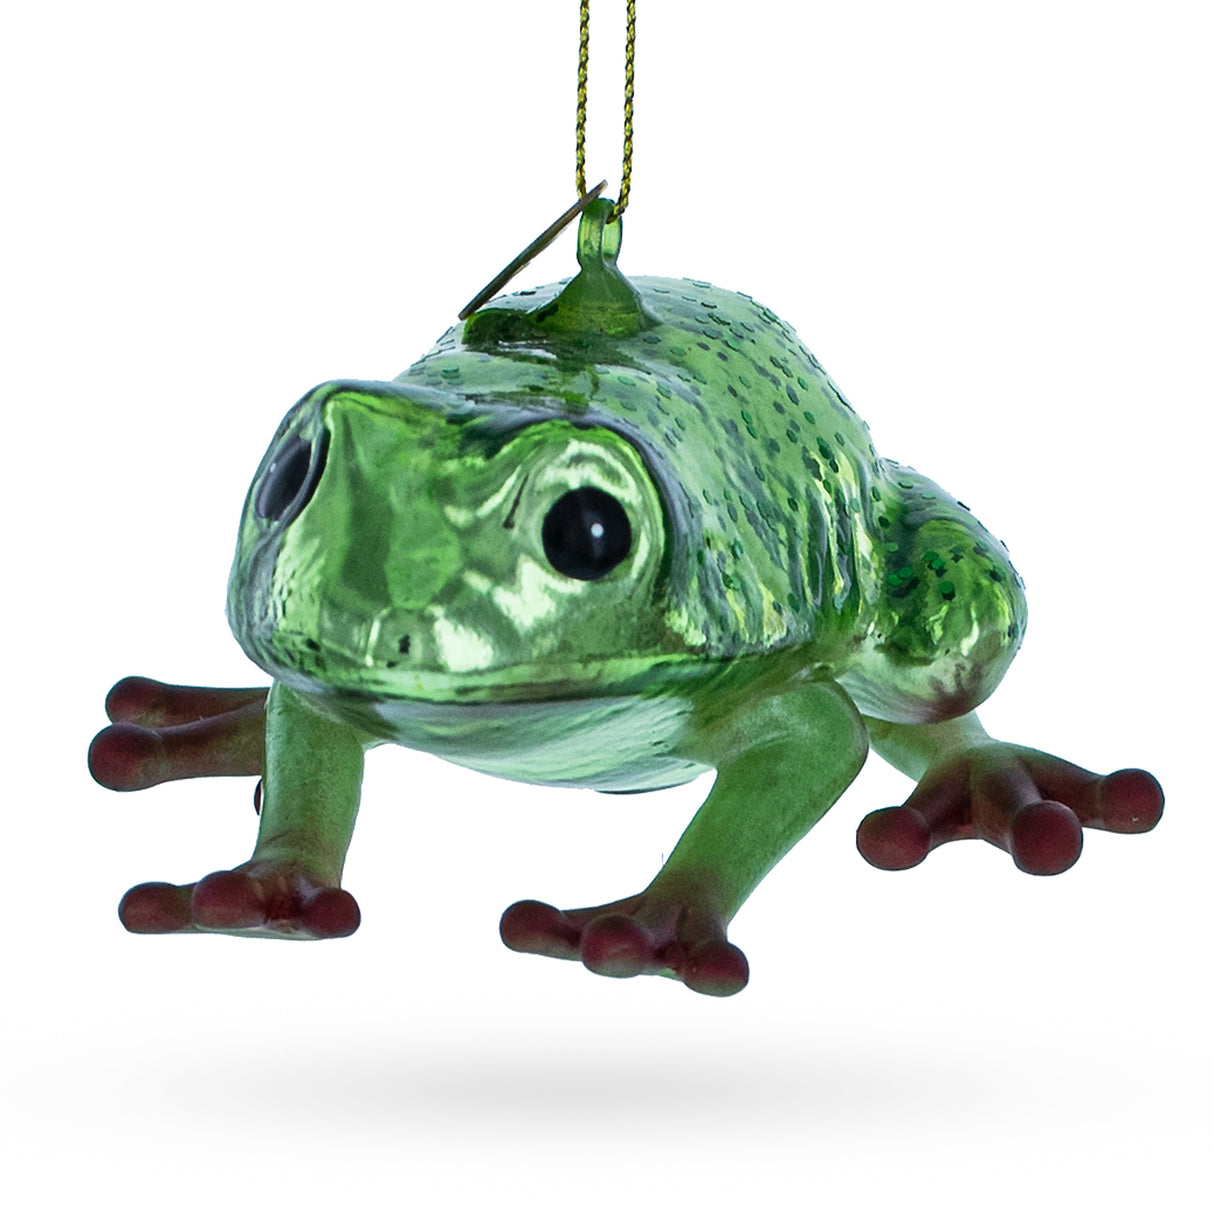 Glass Lively Green Frog - Blown Glass Christmas Ornament in Green color